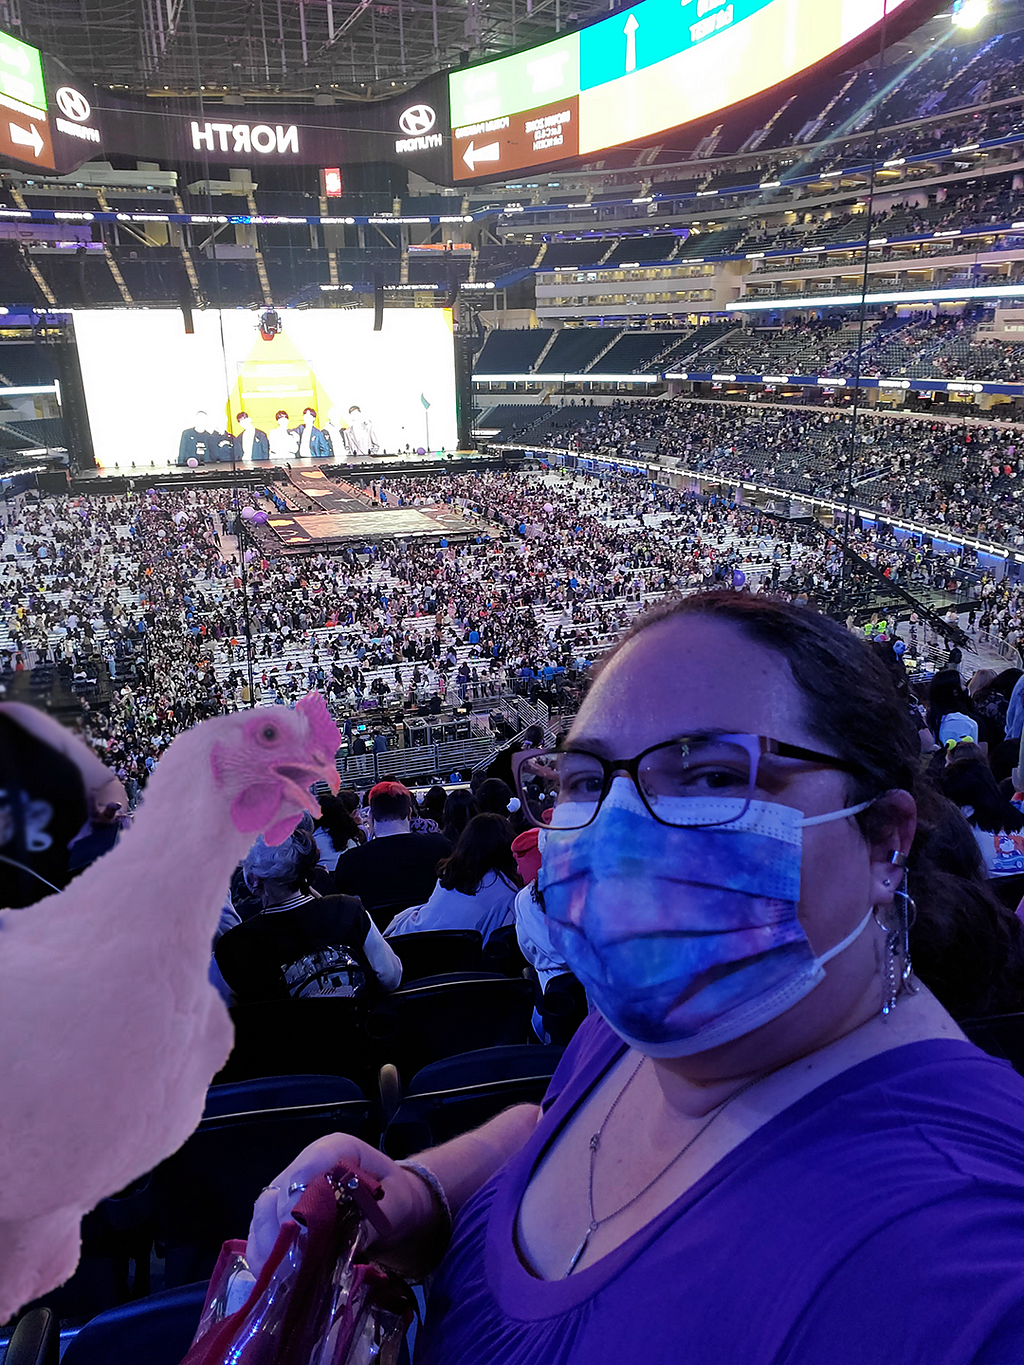 Selfie at a stadium with a woman with a purple face mask and purple shirt on next to a purple colored chicken badly photoshopped in